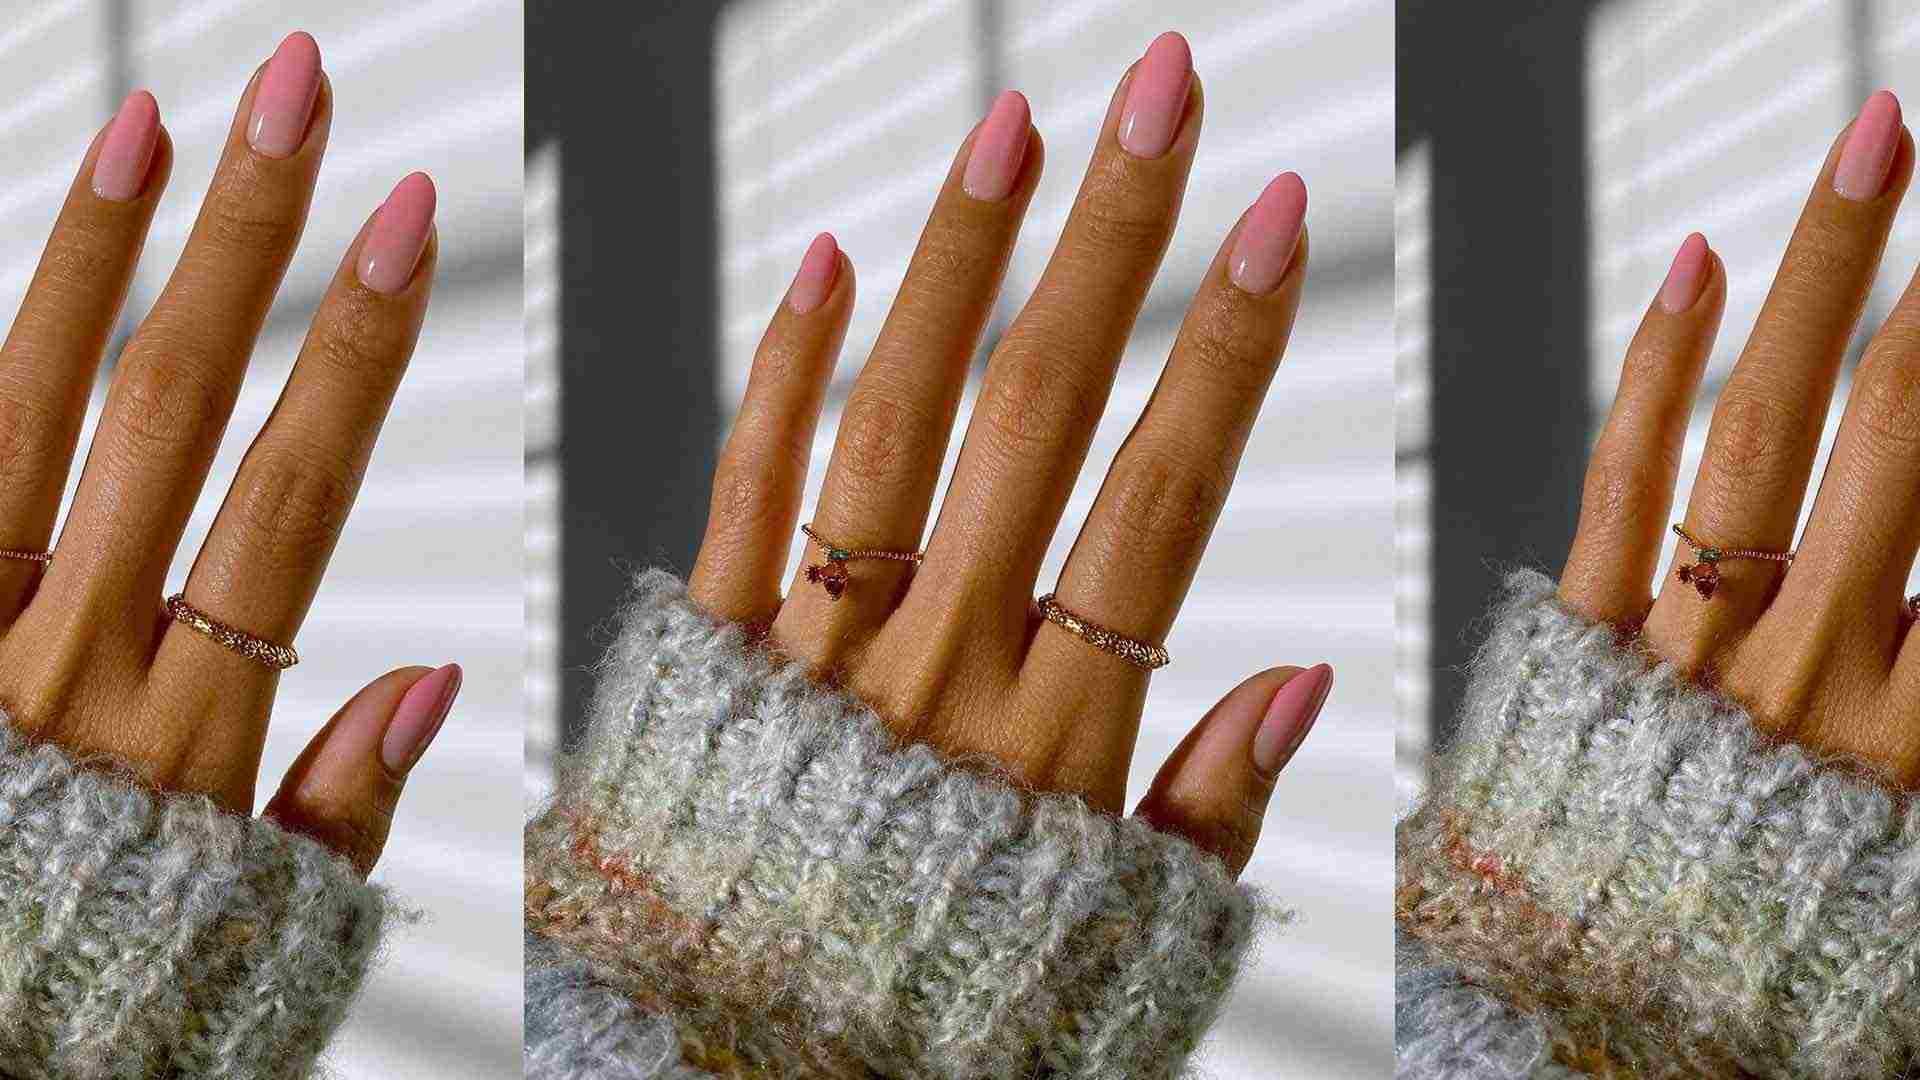 2. Romantic Nail Designs for a Date - wide 5